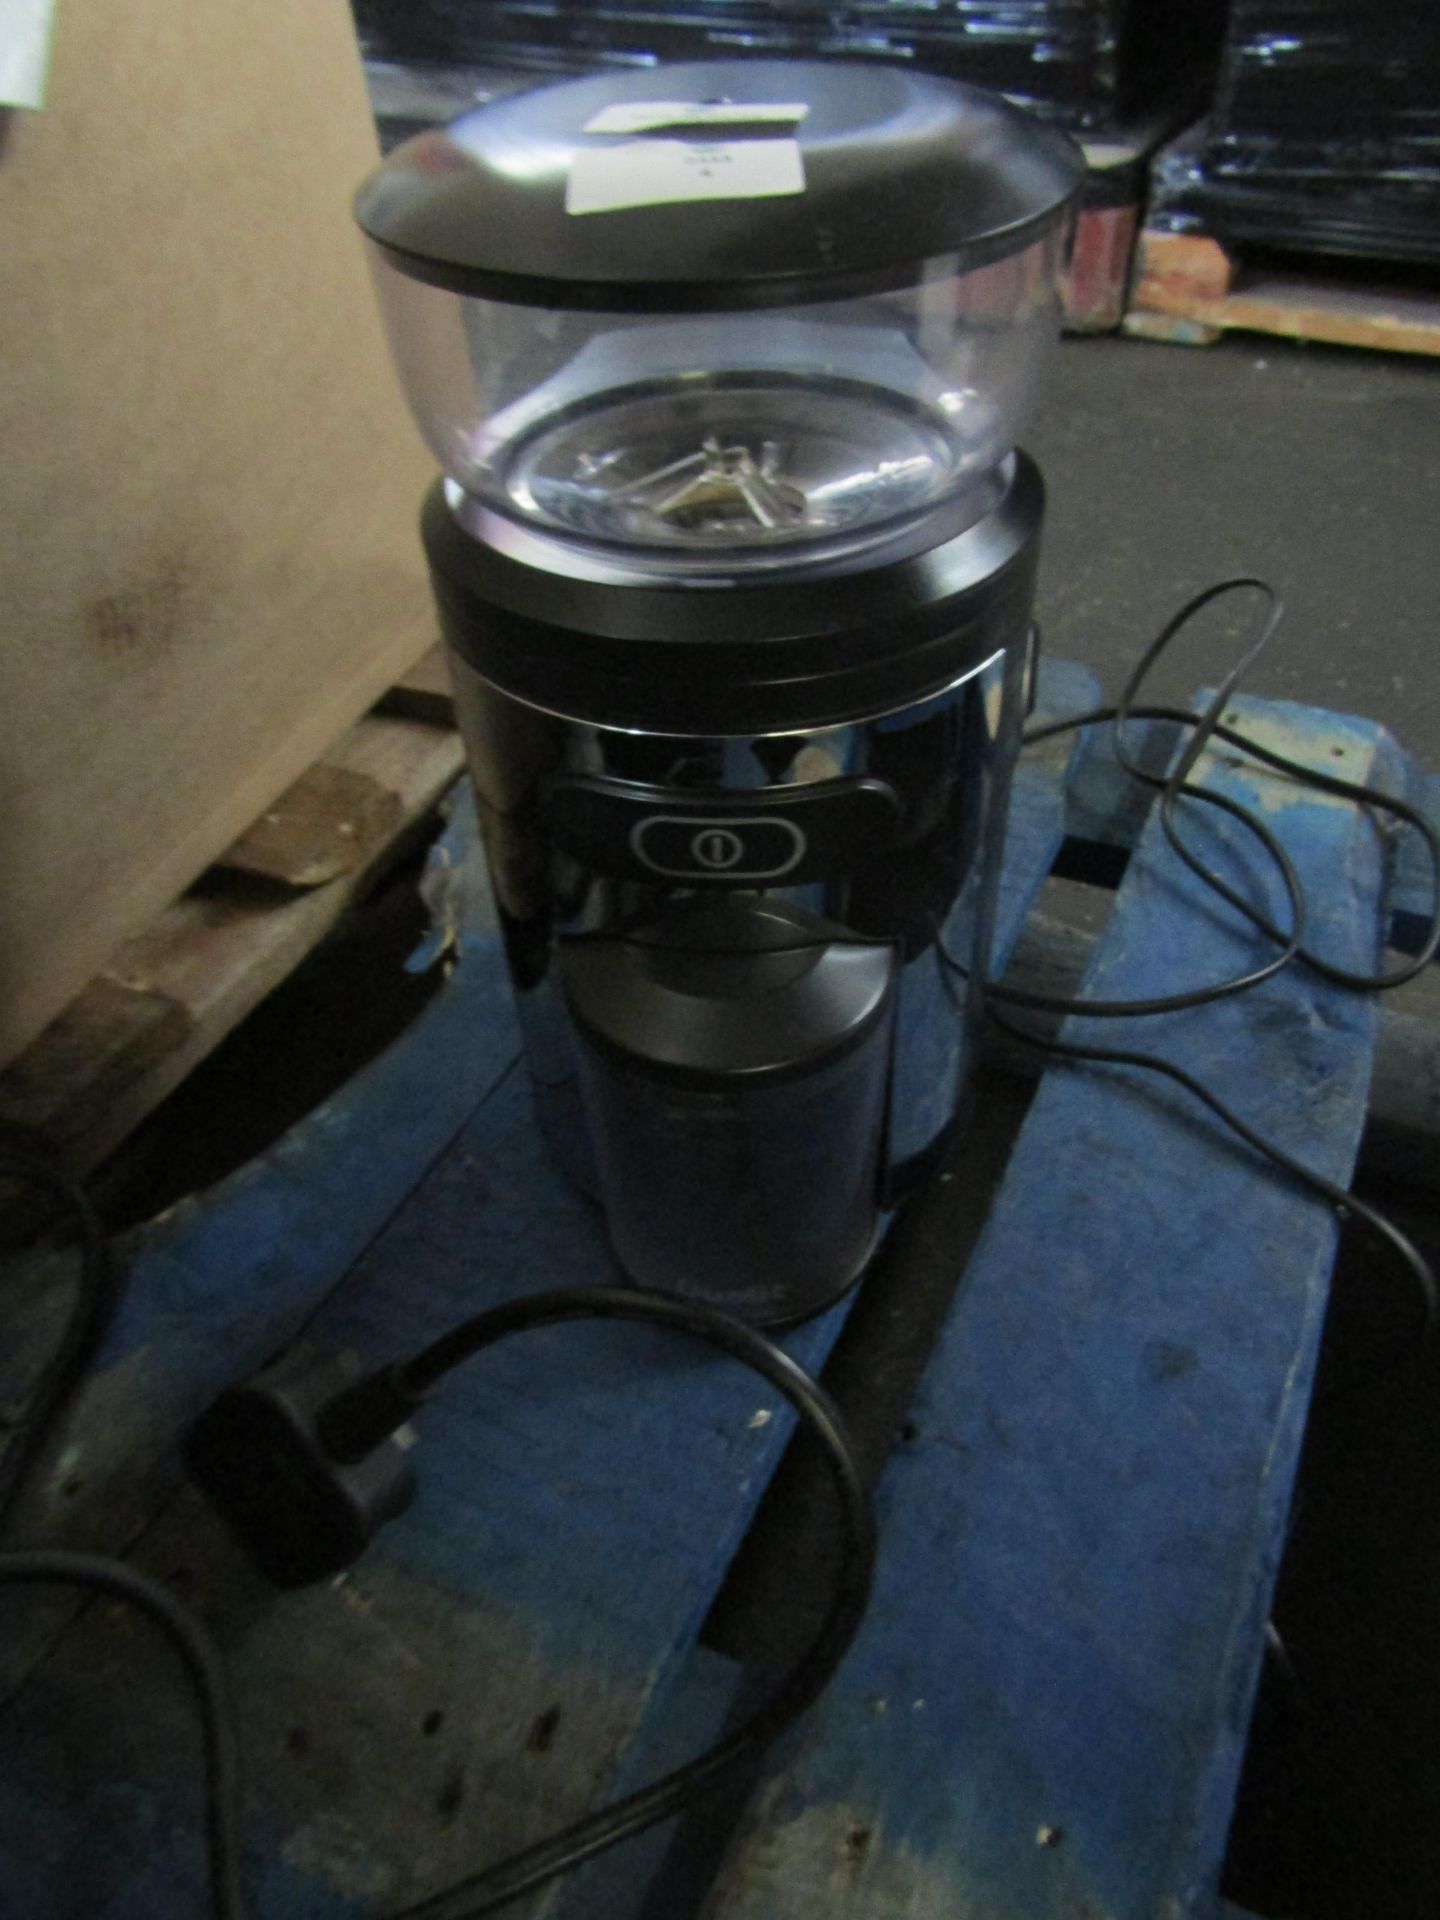 Duelit Coffee Grinder tested working (has been used but in good condition